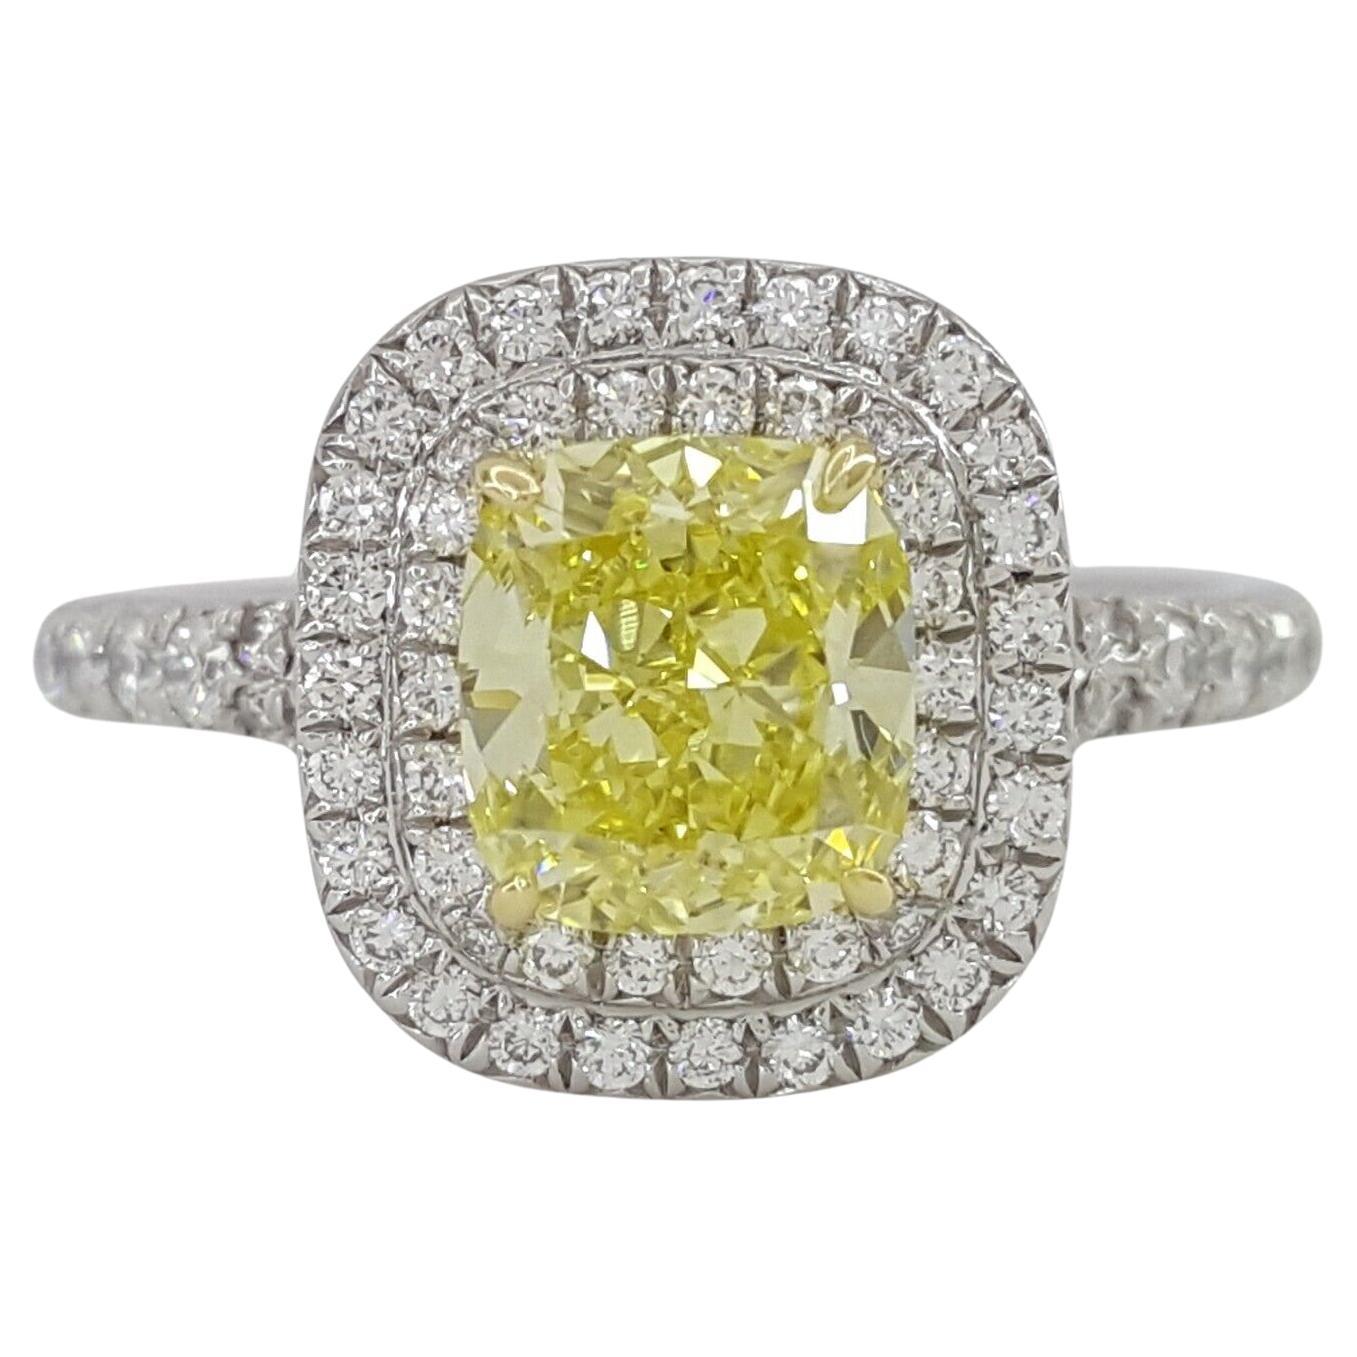 Tiffany & Co. Soleste Fancy Intense Yellow Halo Diamond Engagement Ring For Sale